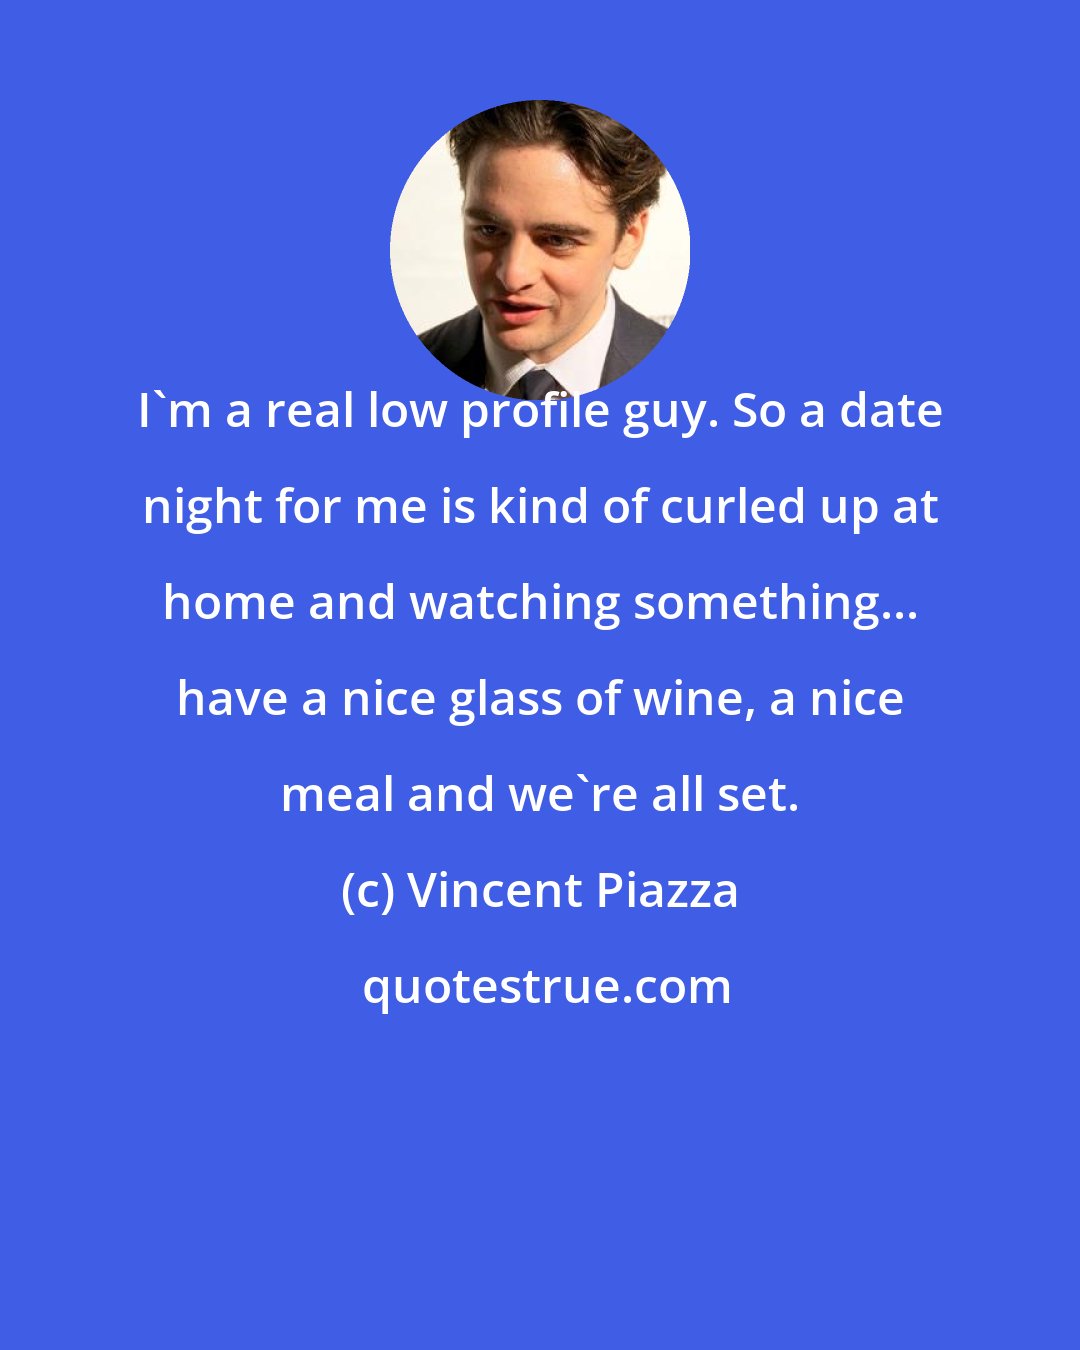 Vincent Piazza: I'm a real low profile guy. So a date night for me is kind of curled up at home and watching something... have a nice glass of wine, a nice meal and we're all set.